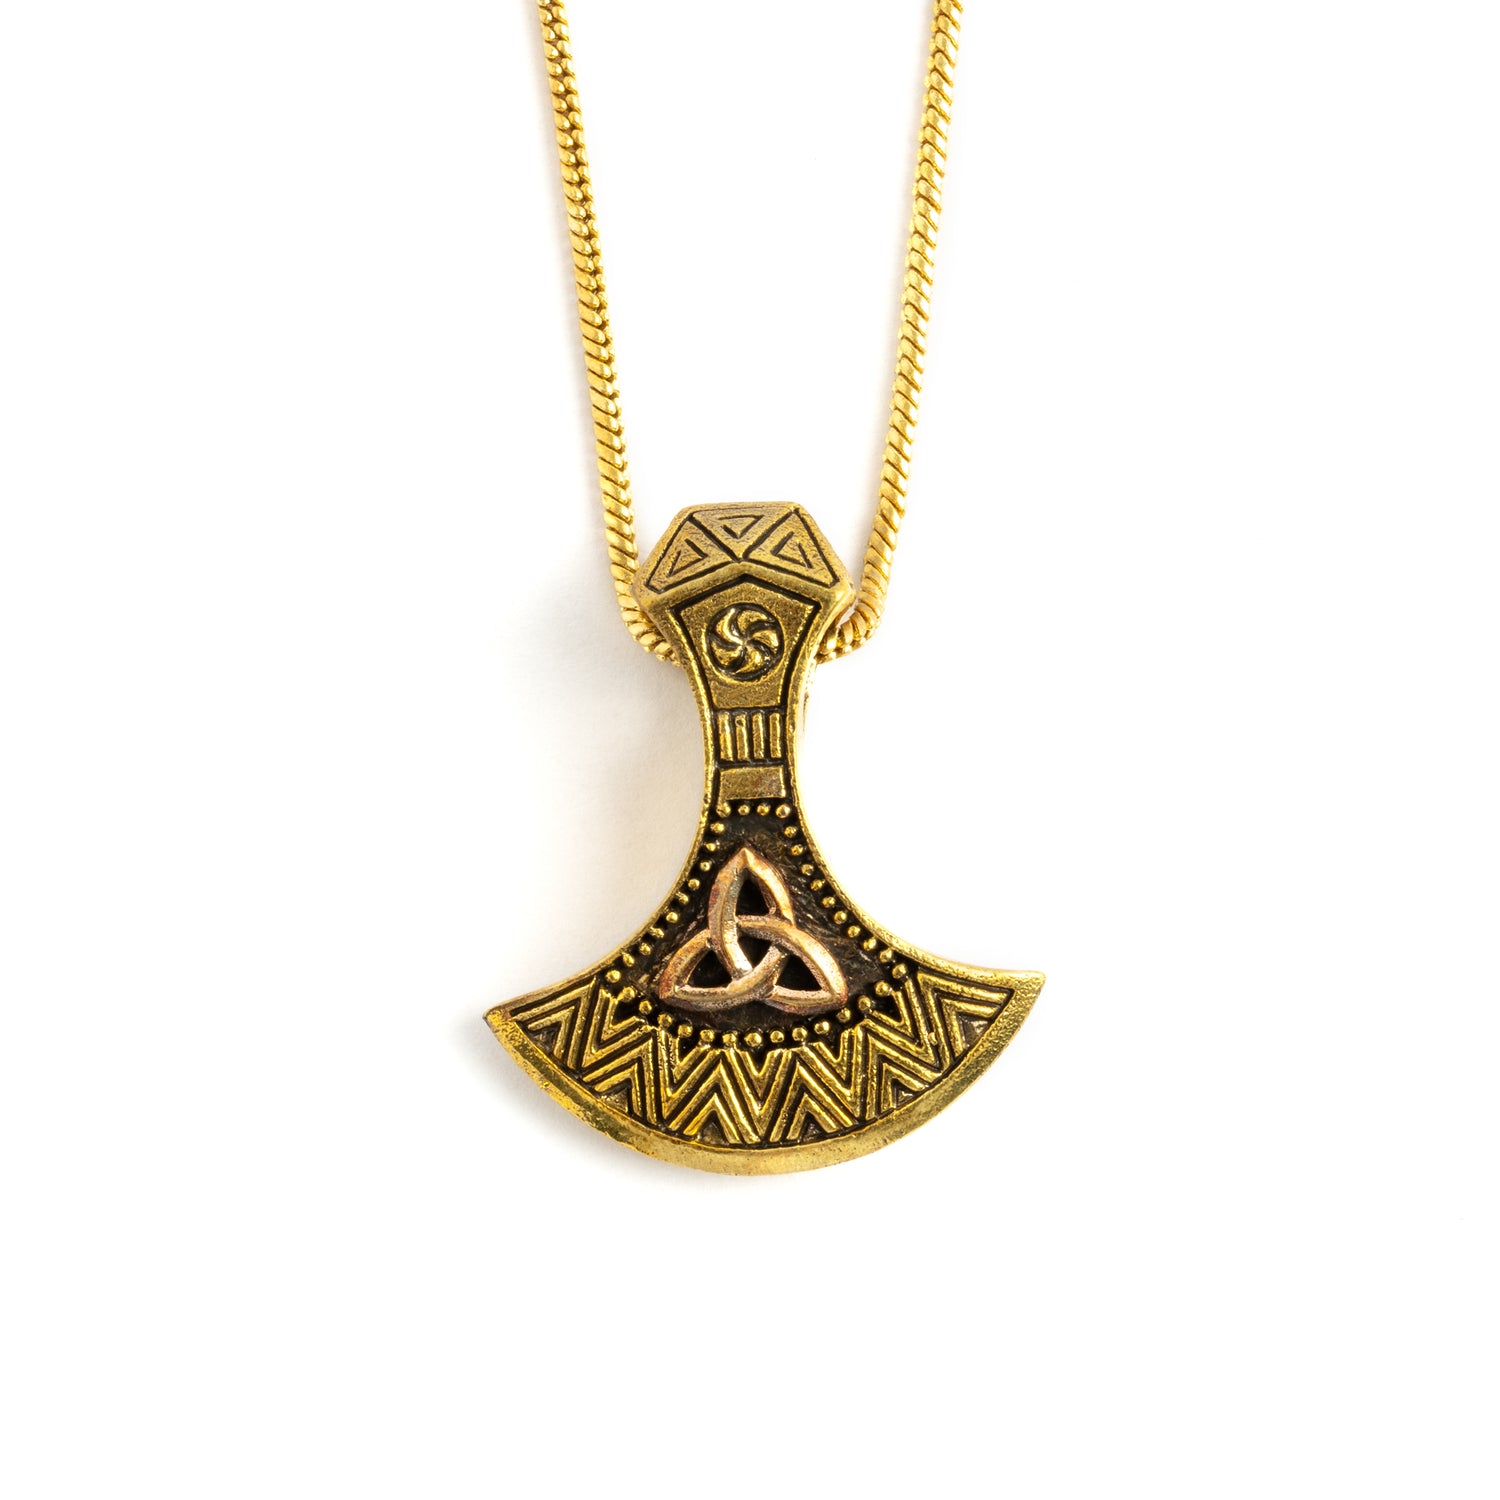 Great Celtic pendant ornamented with the symbol of eternal spiritual life- The trinity knot, a shape that forms by a continuous line that interweaves around itself, with no beginning and no end.   Material: Brass, Copper inlay Nickel, cadmium and lead free. Dimensions : H 35mm , W 30mm Comes on adjustable cotton string or 24&quot; brass chain.